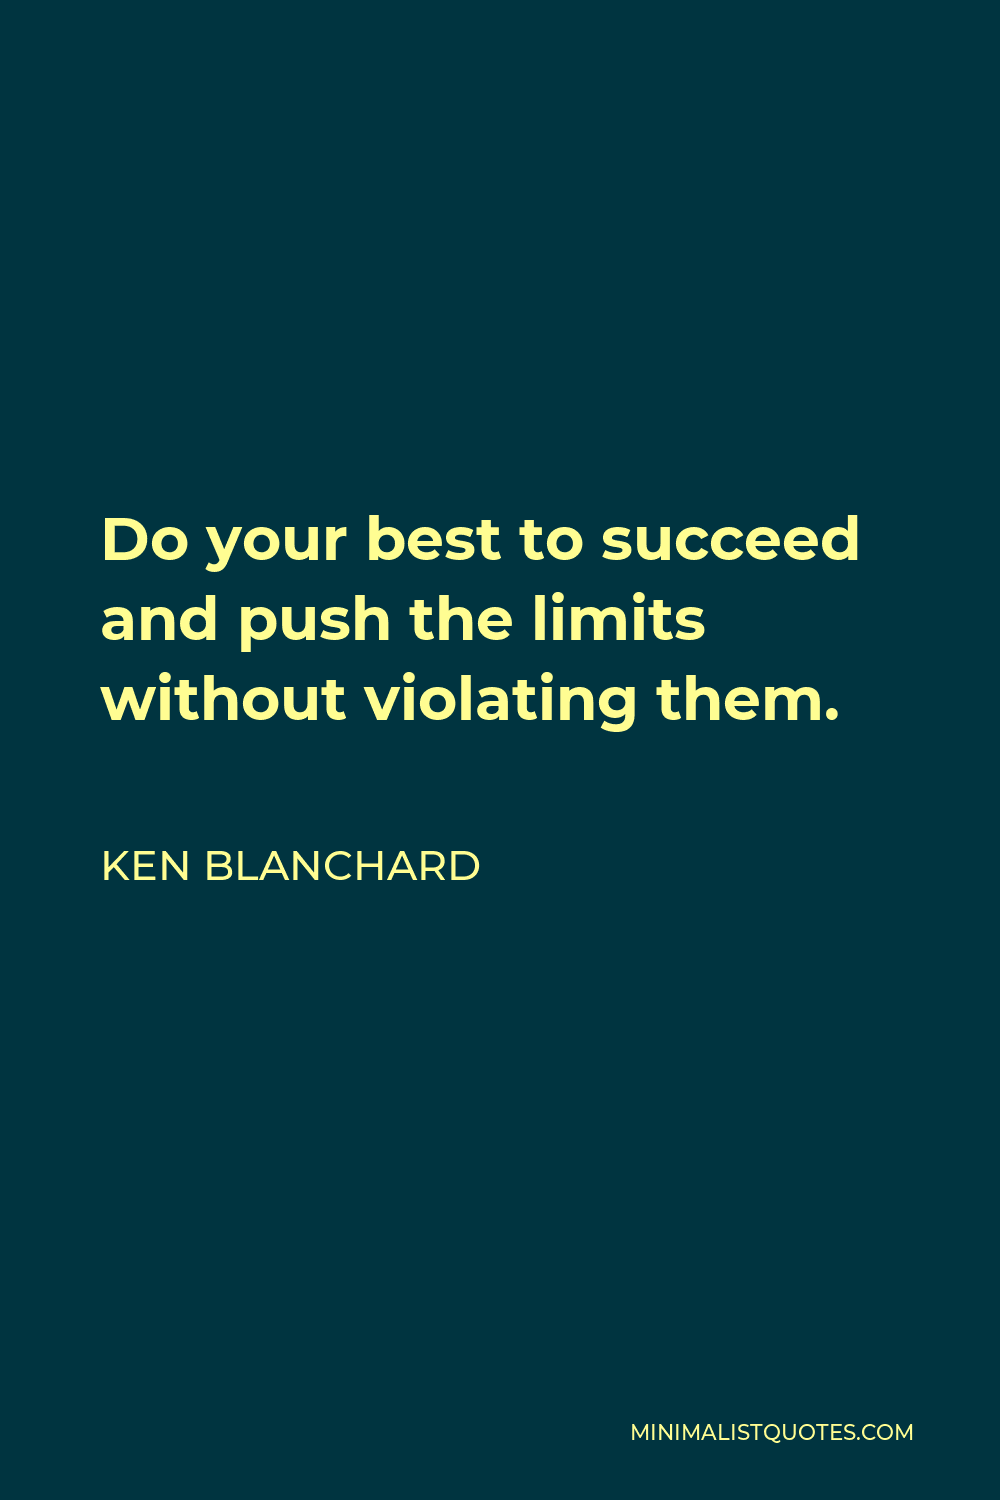 Ken Blanchard Quote - Do your best to succeed and push the limits without violating them.